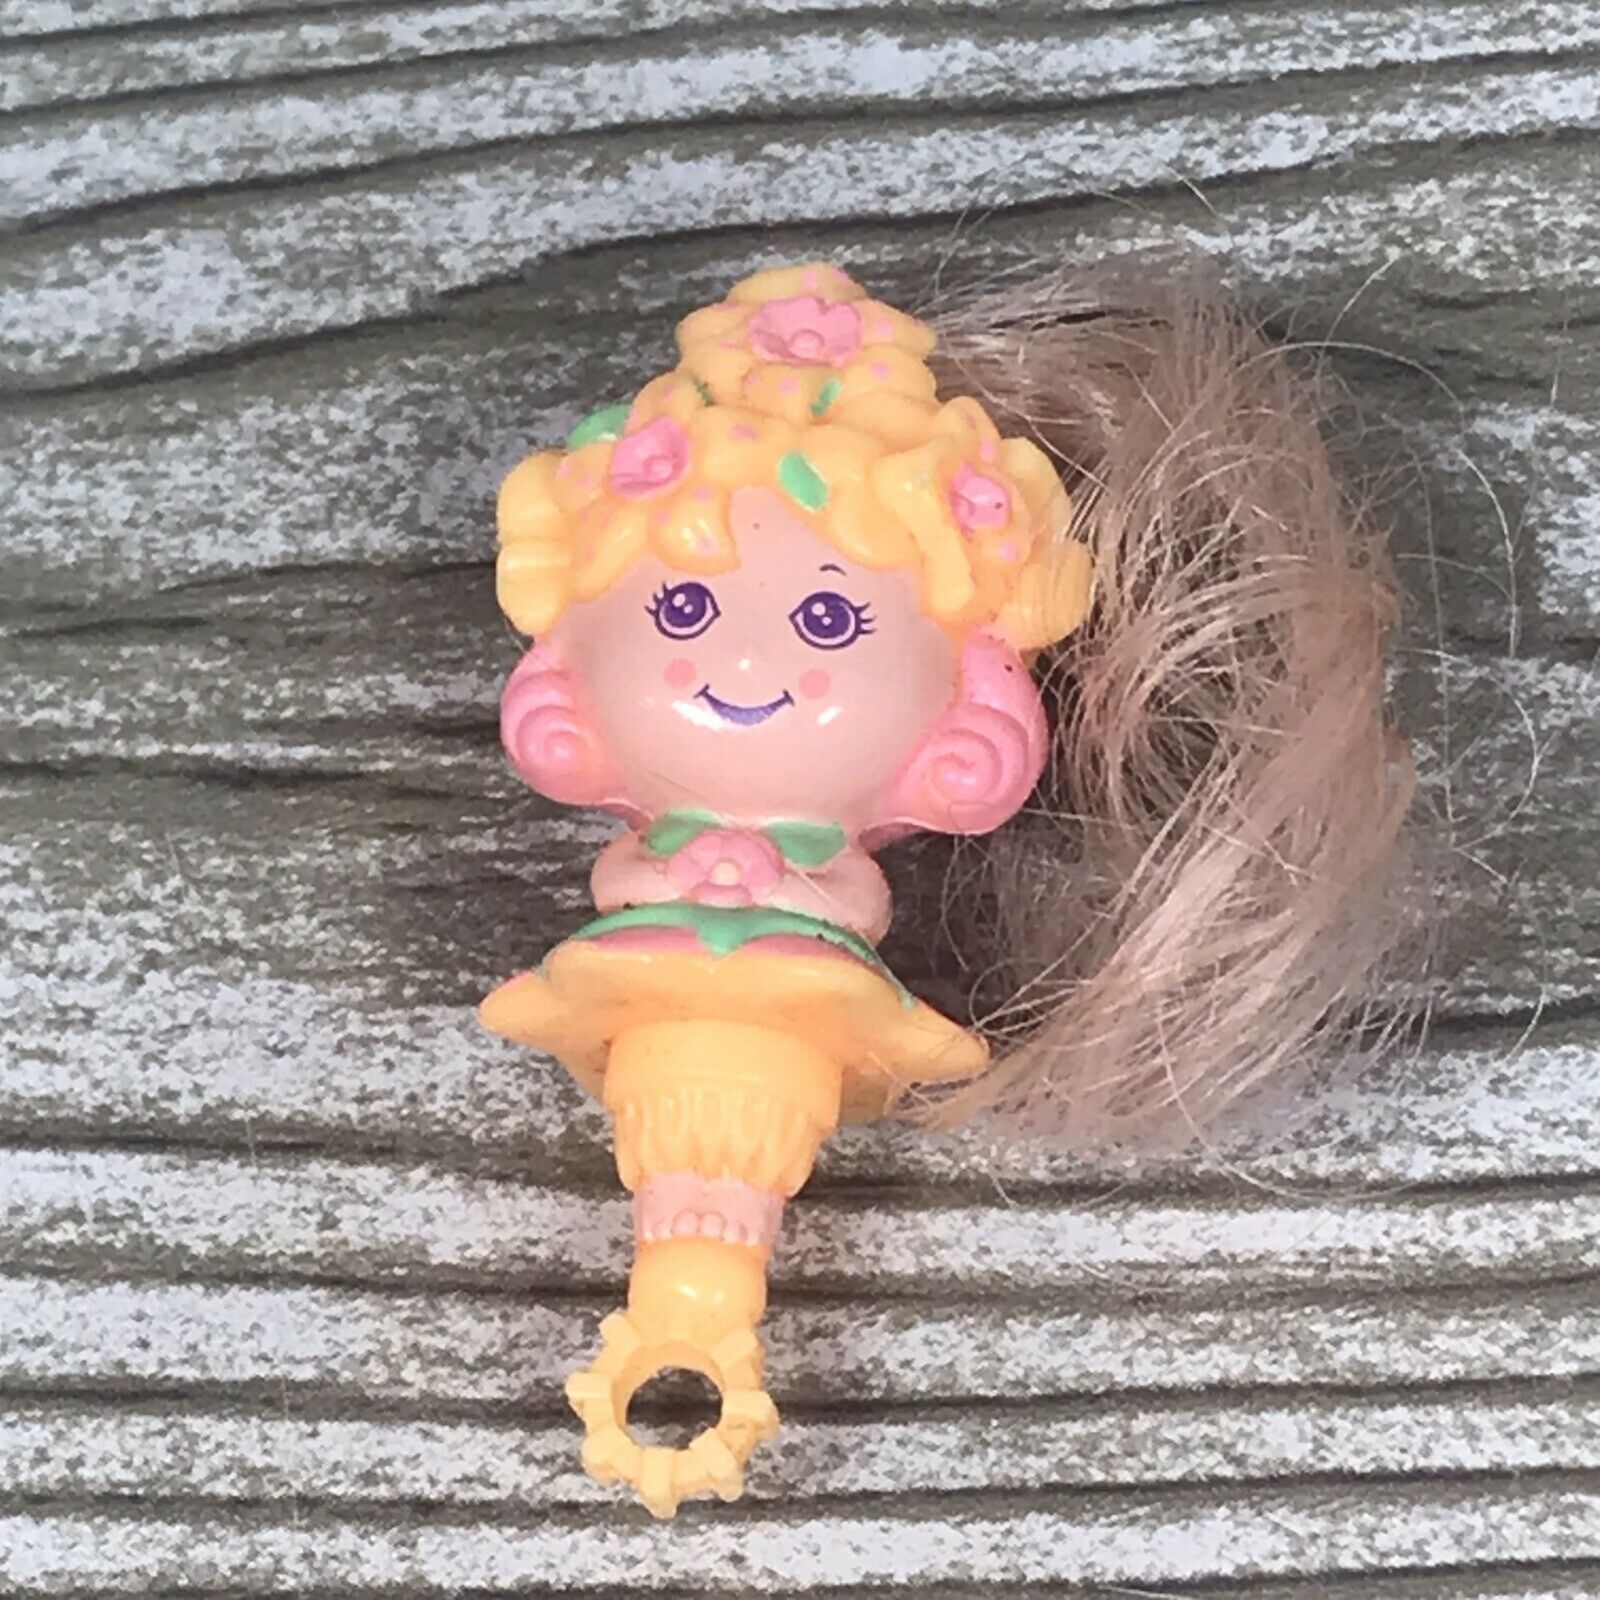 Vintage 1990 Hasbro Bubblins “flower Girl” Miniature Bubble Wand Doll Toy